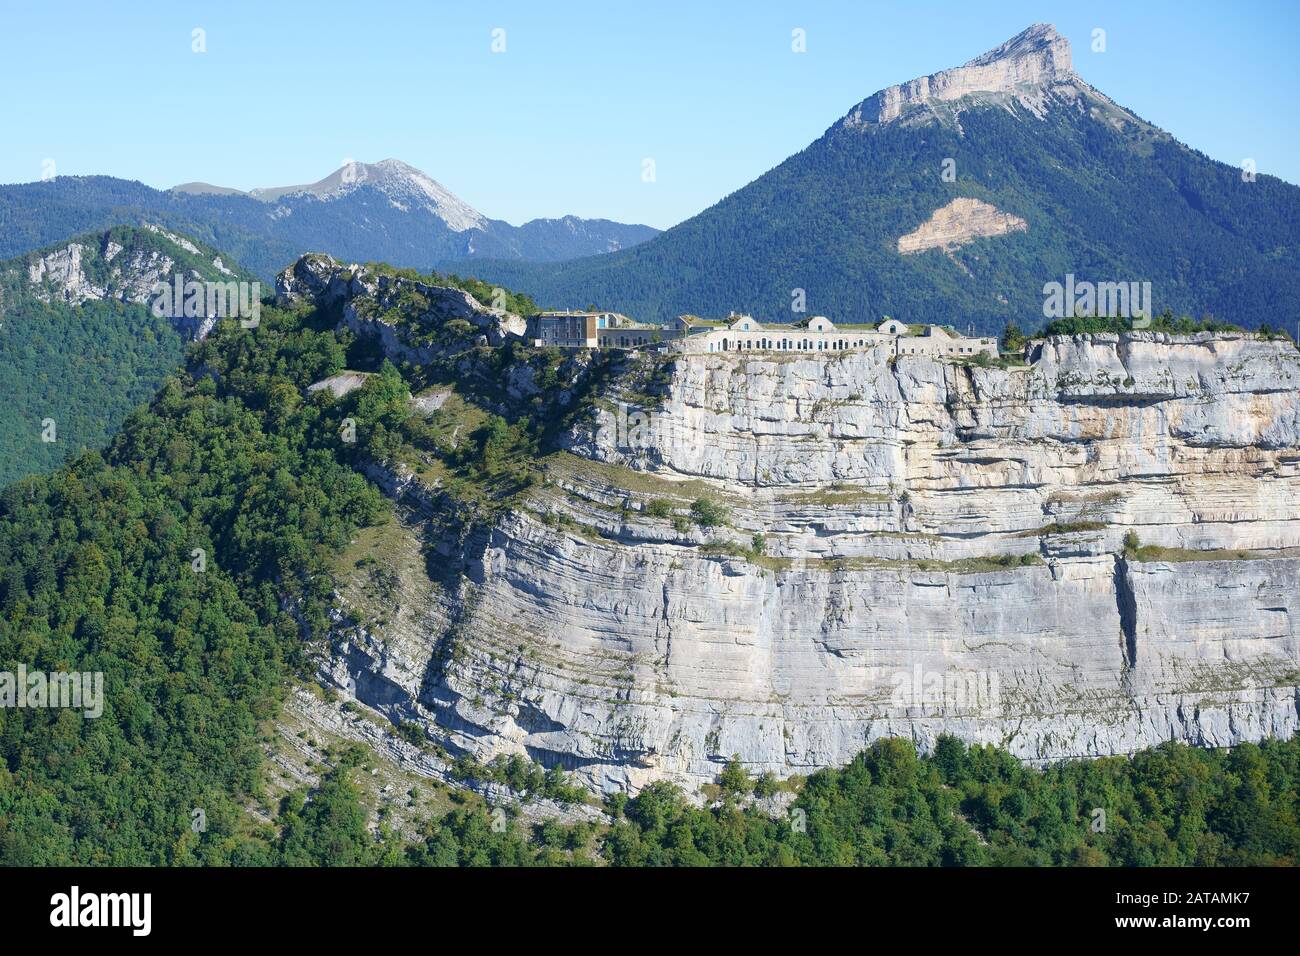 AERIAL VIEW. Military fort of Saint- Eynard standing at the top of a precipitous cliff. Isère, Auvergne-Rhône-Alpes, France. Stock Photo